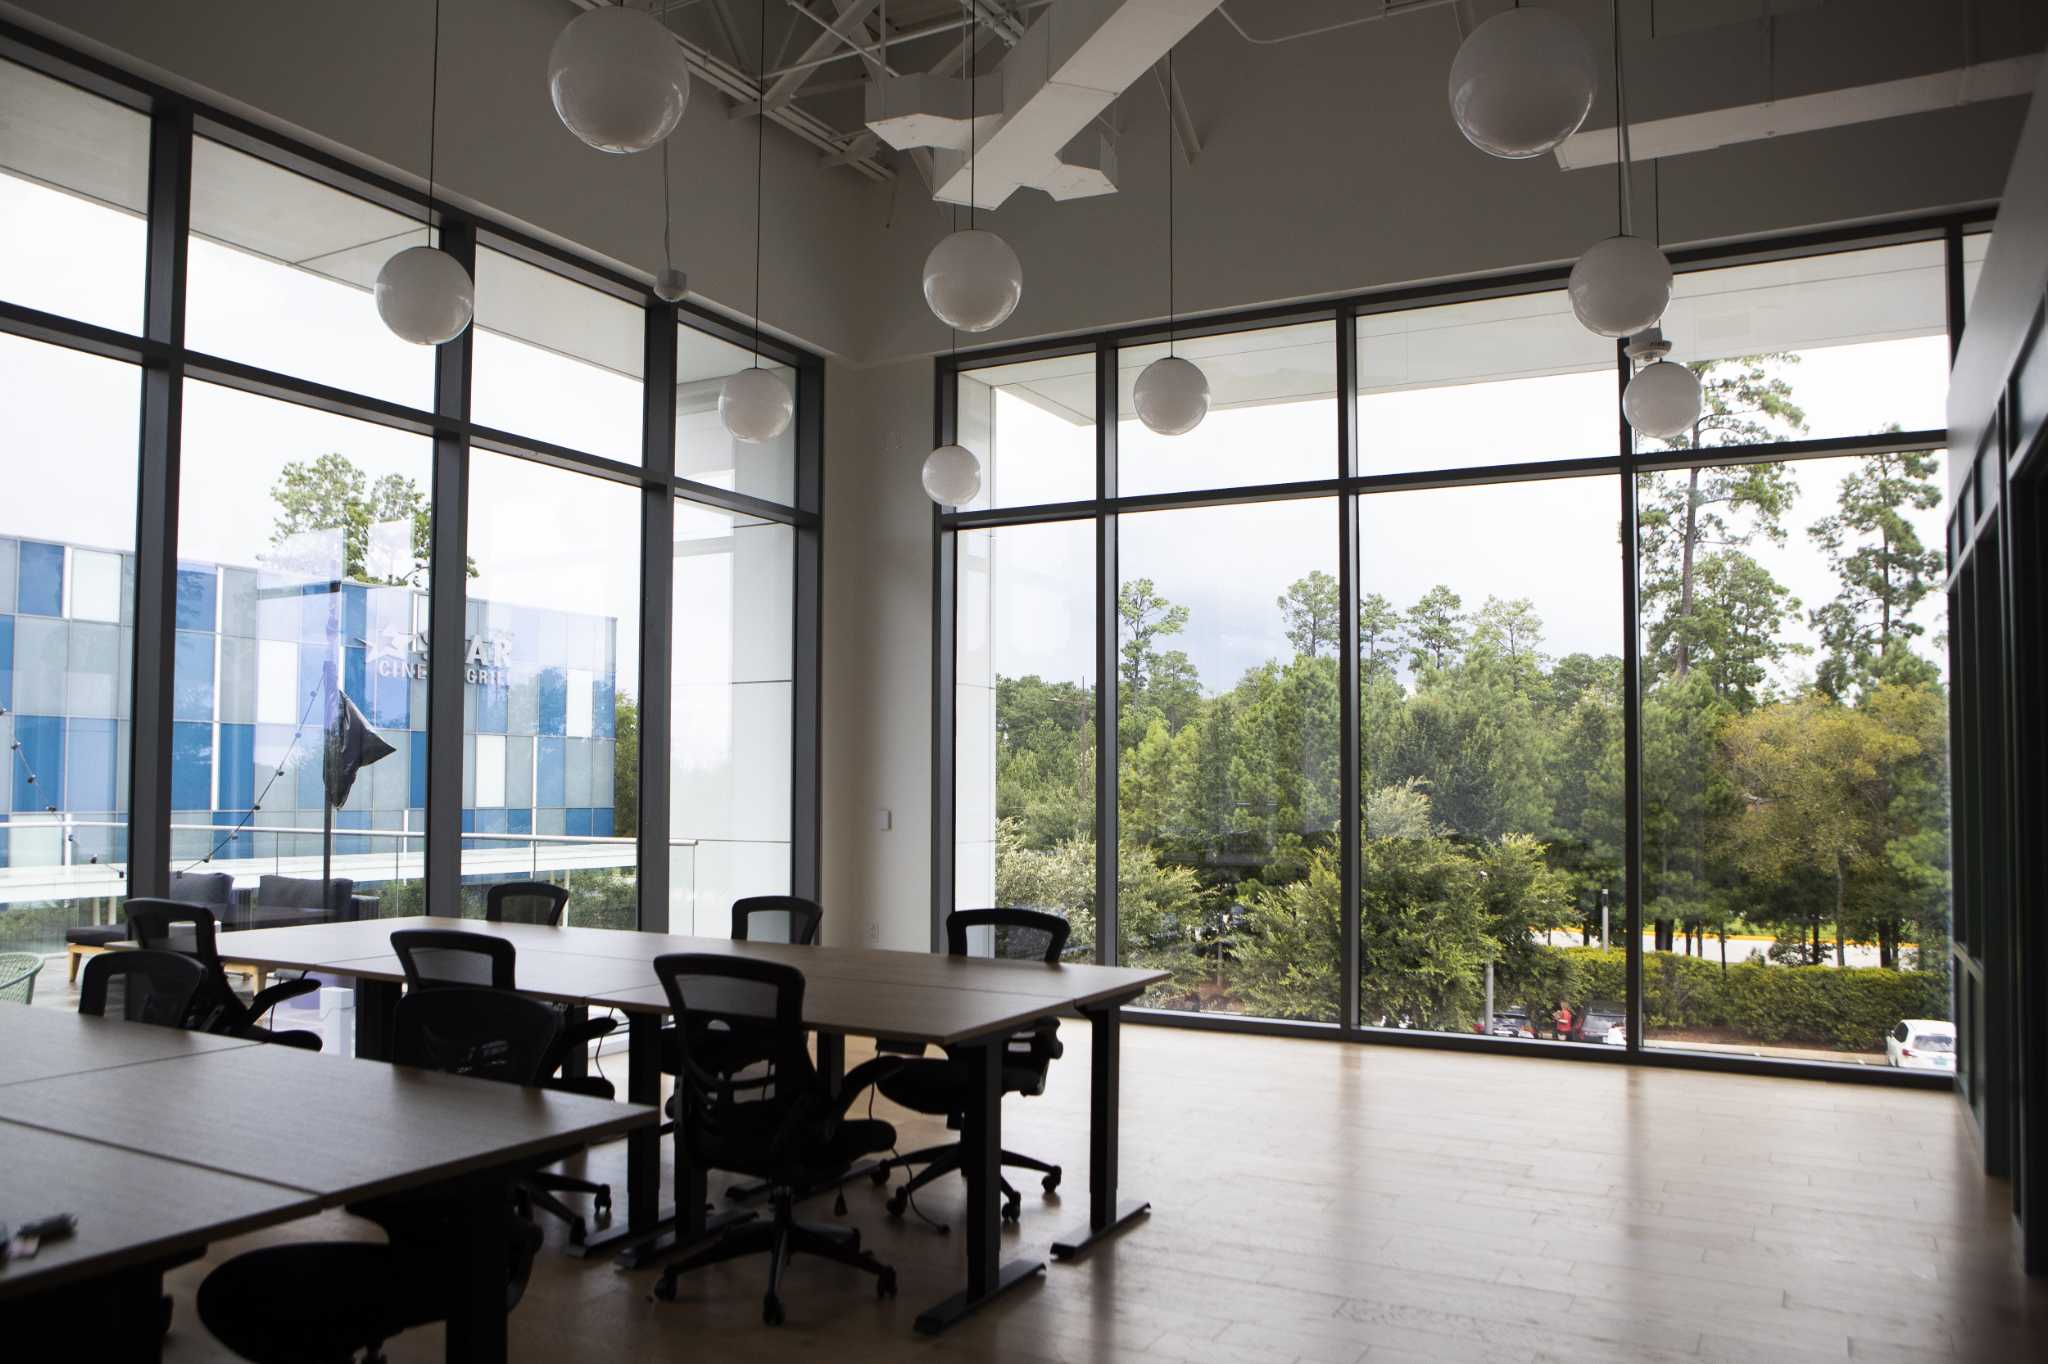 New Woodlands coworking spaces open amid rise in Houston hybrid work